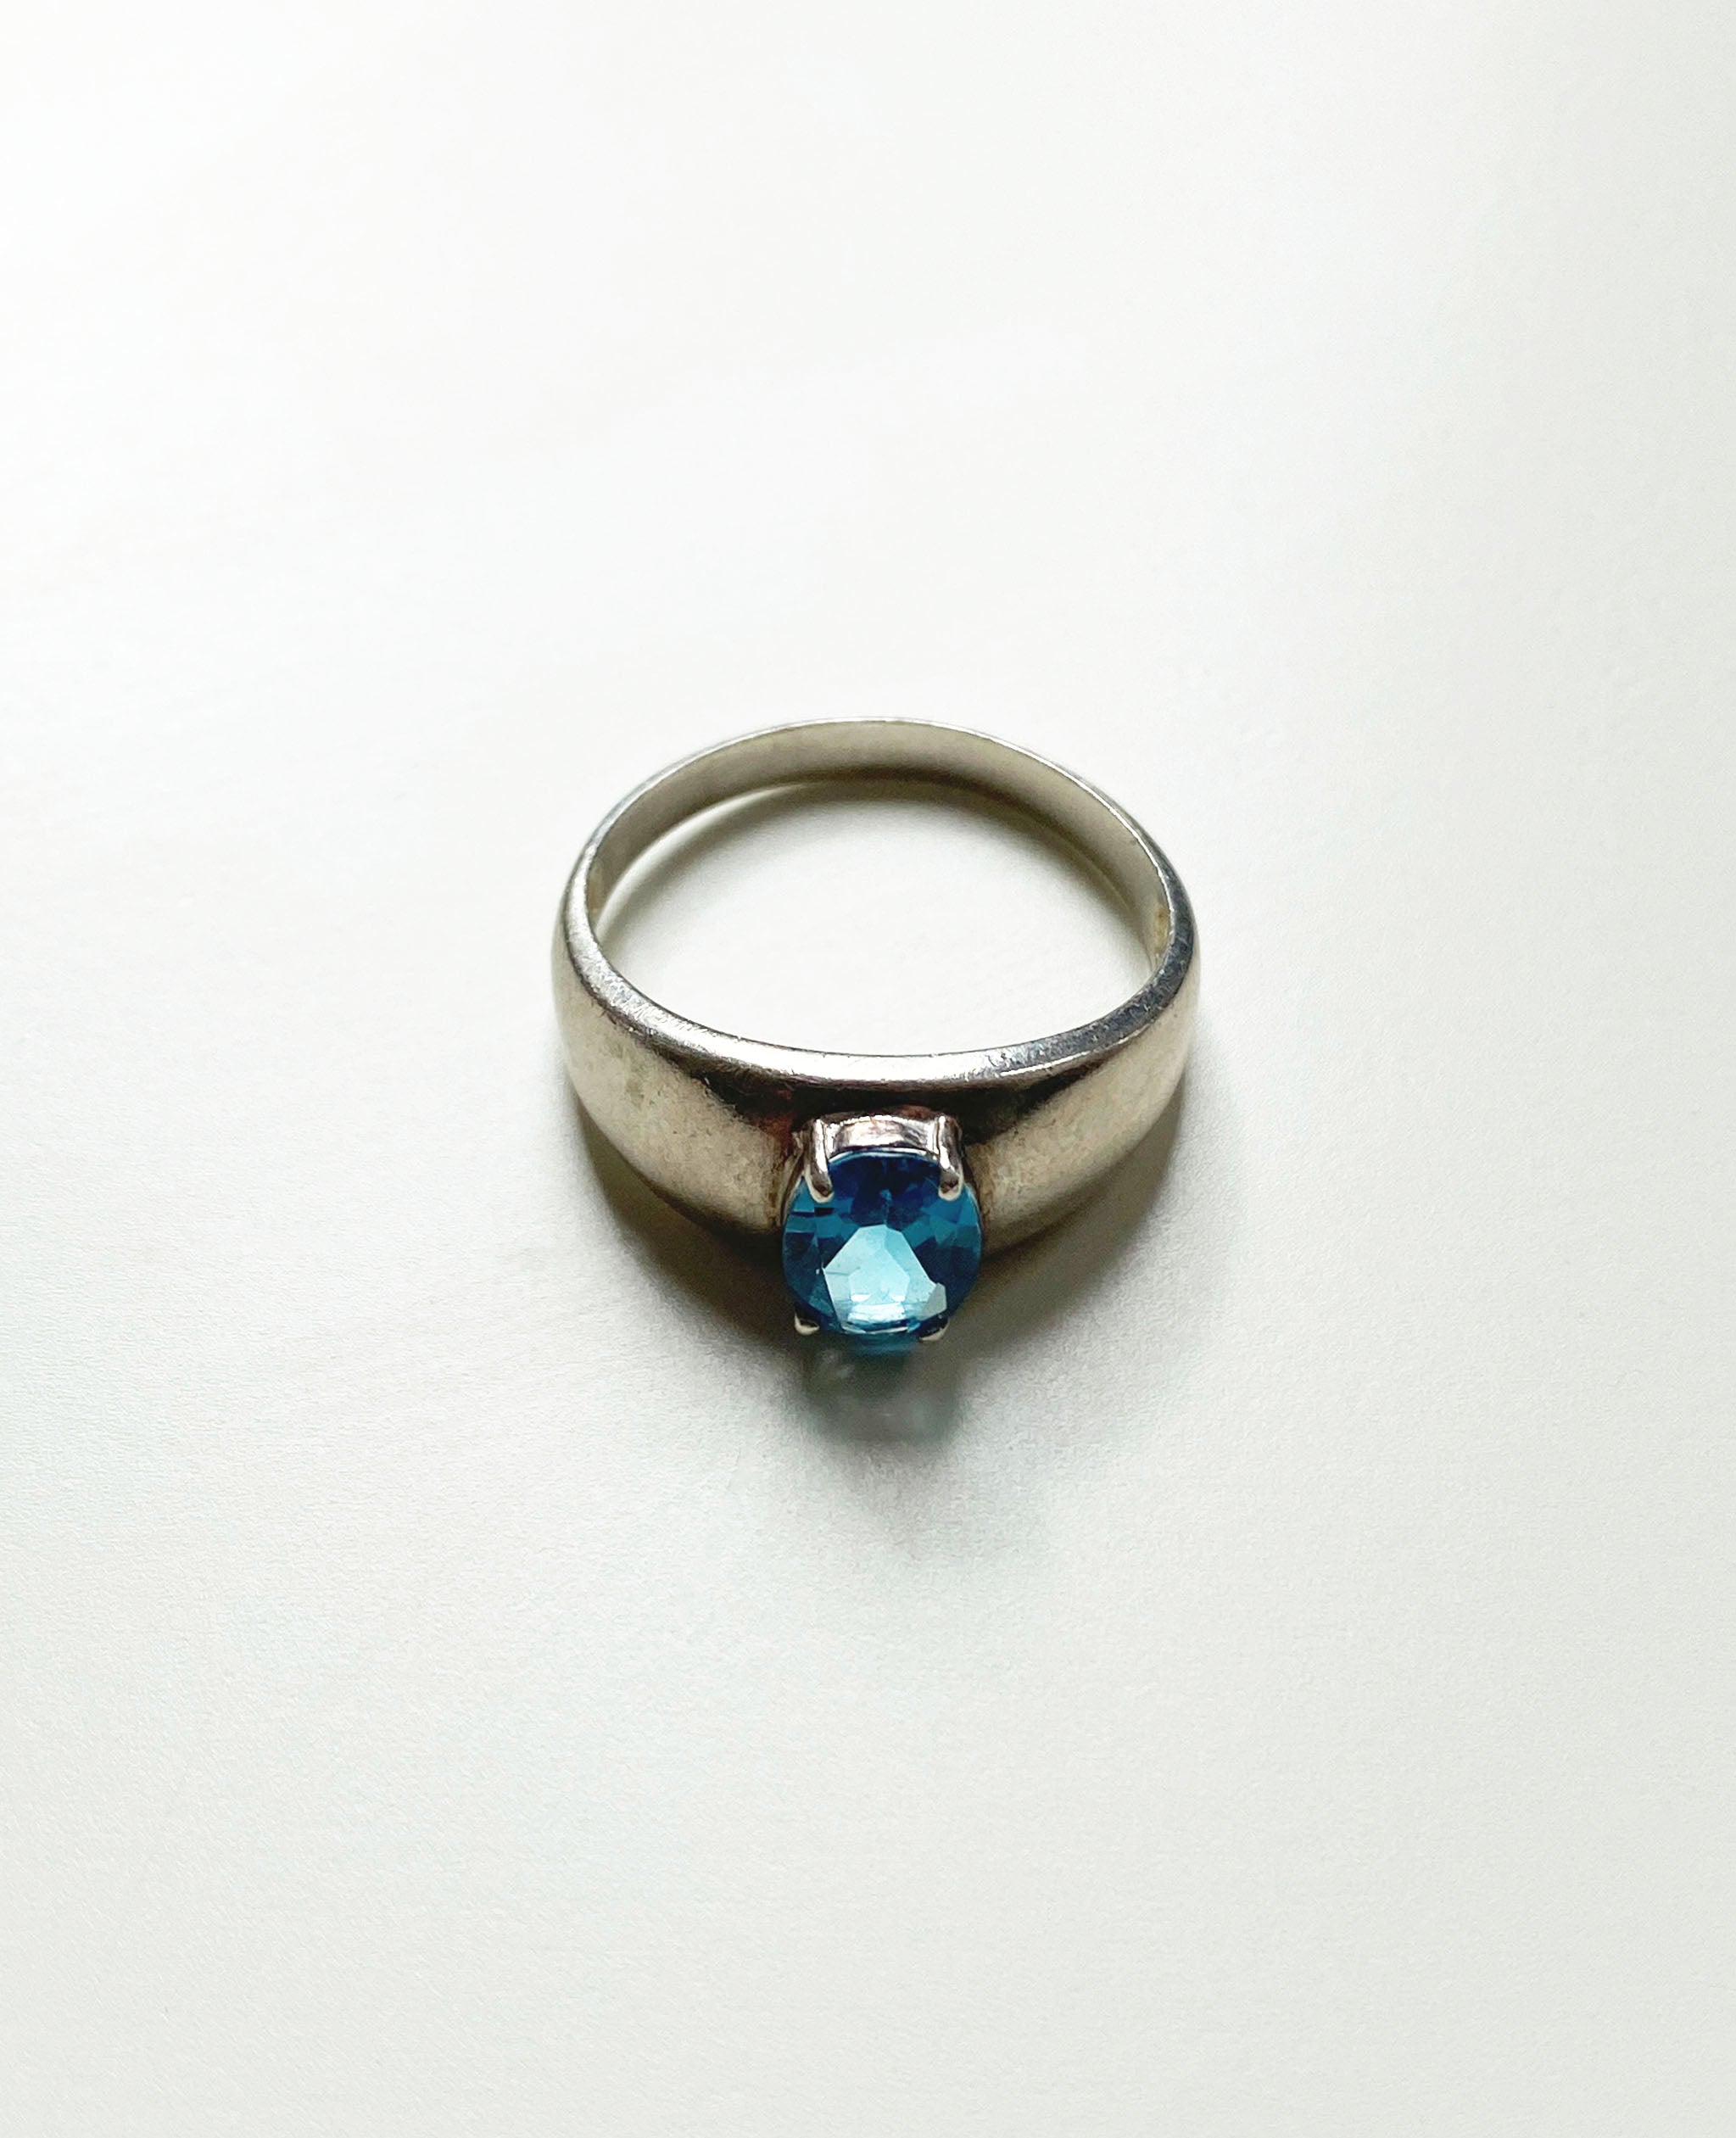 Silver Ring with Blue Oval Stone